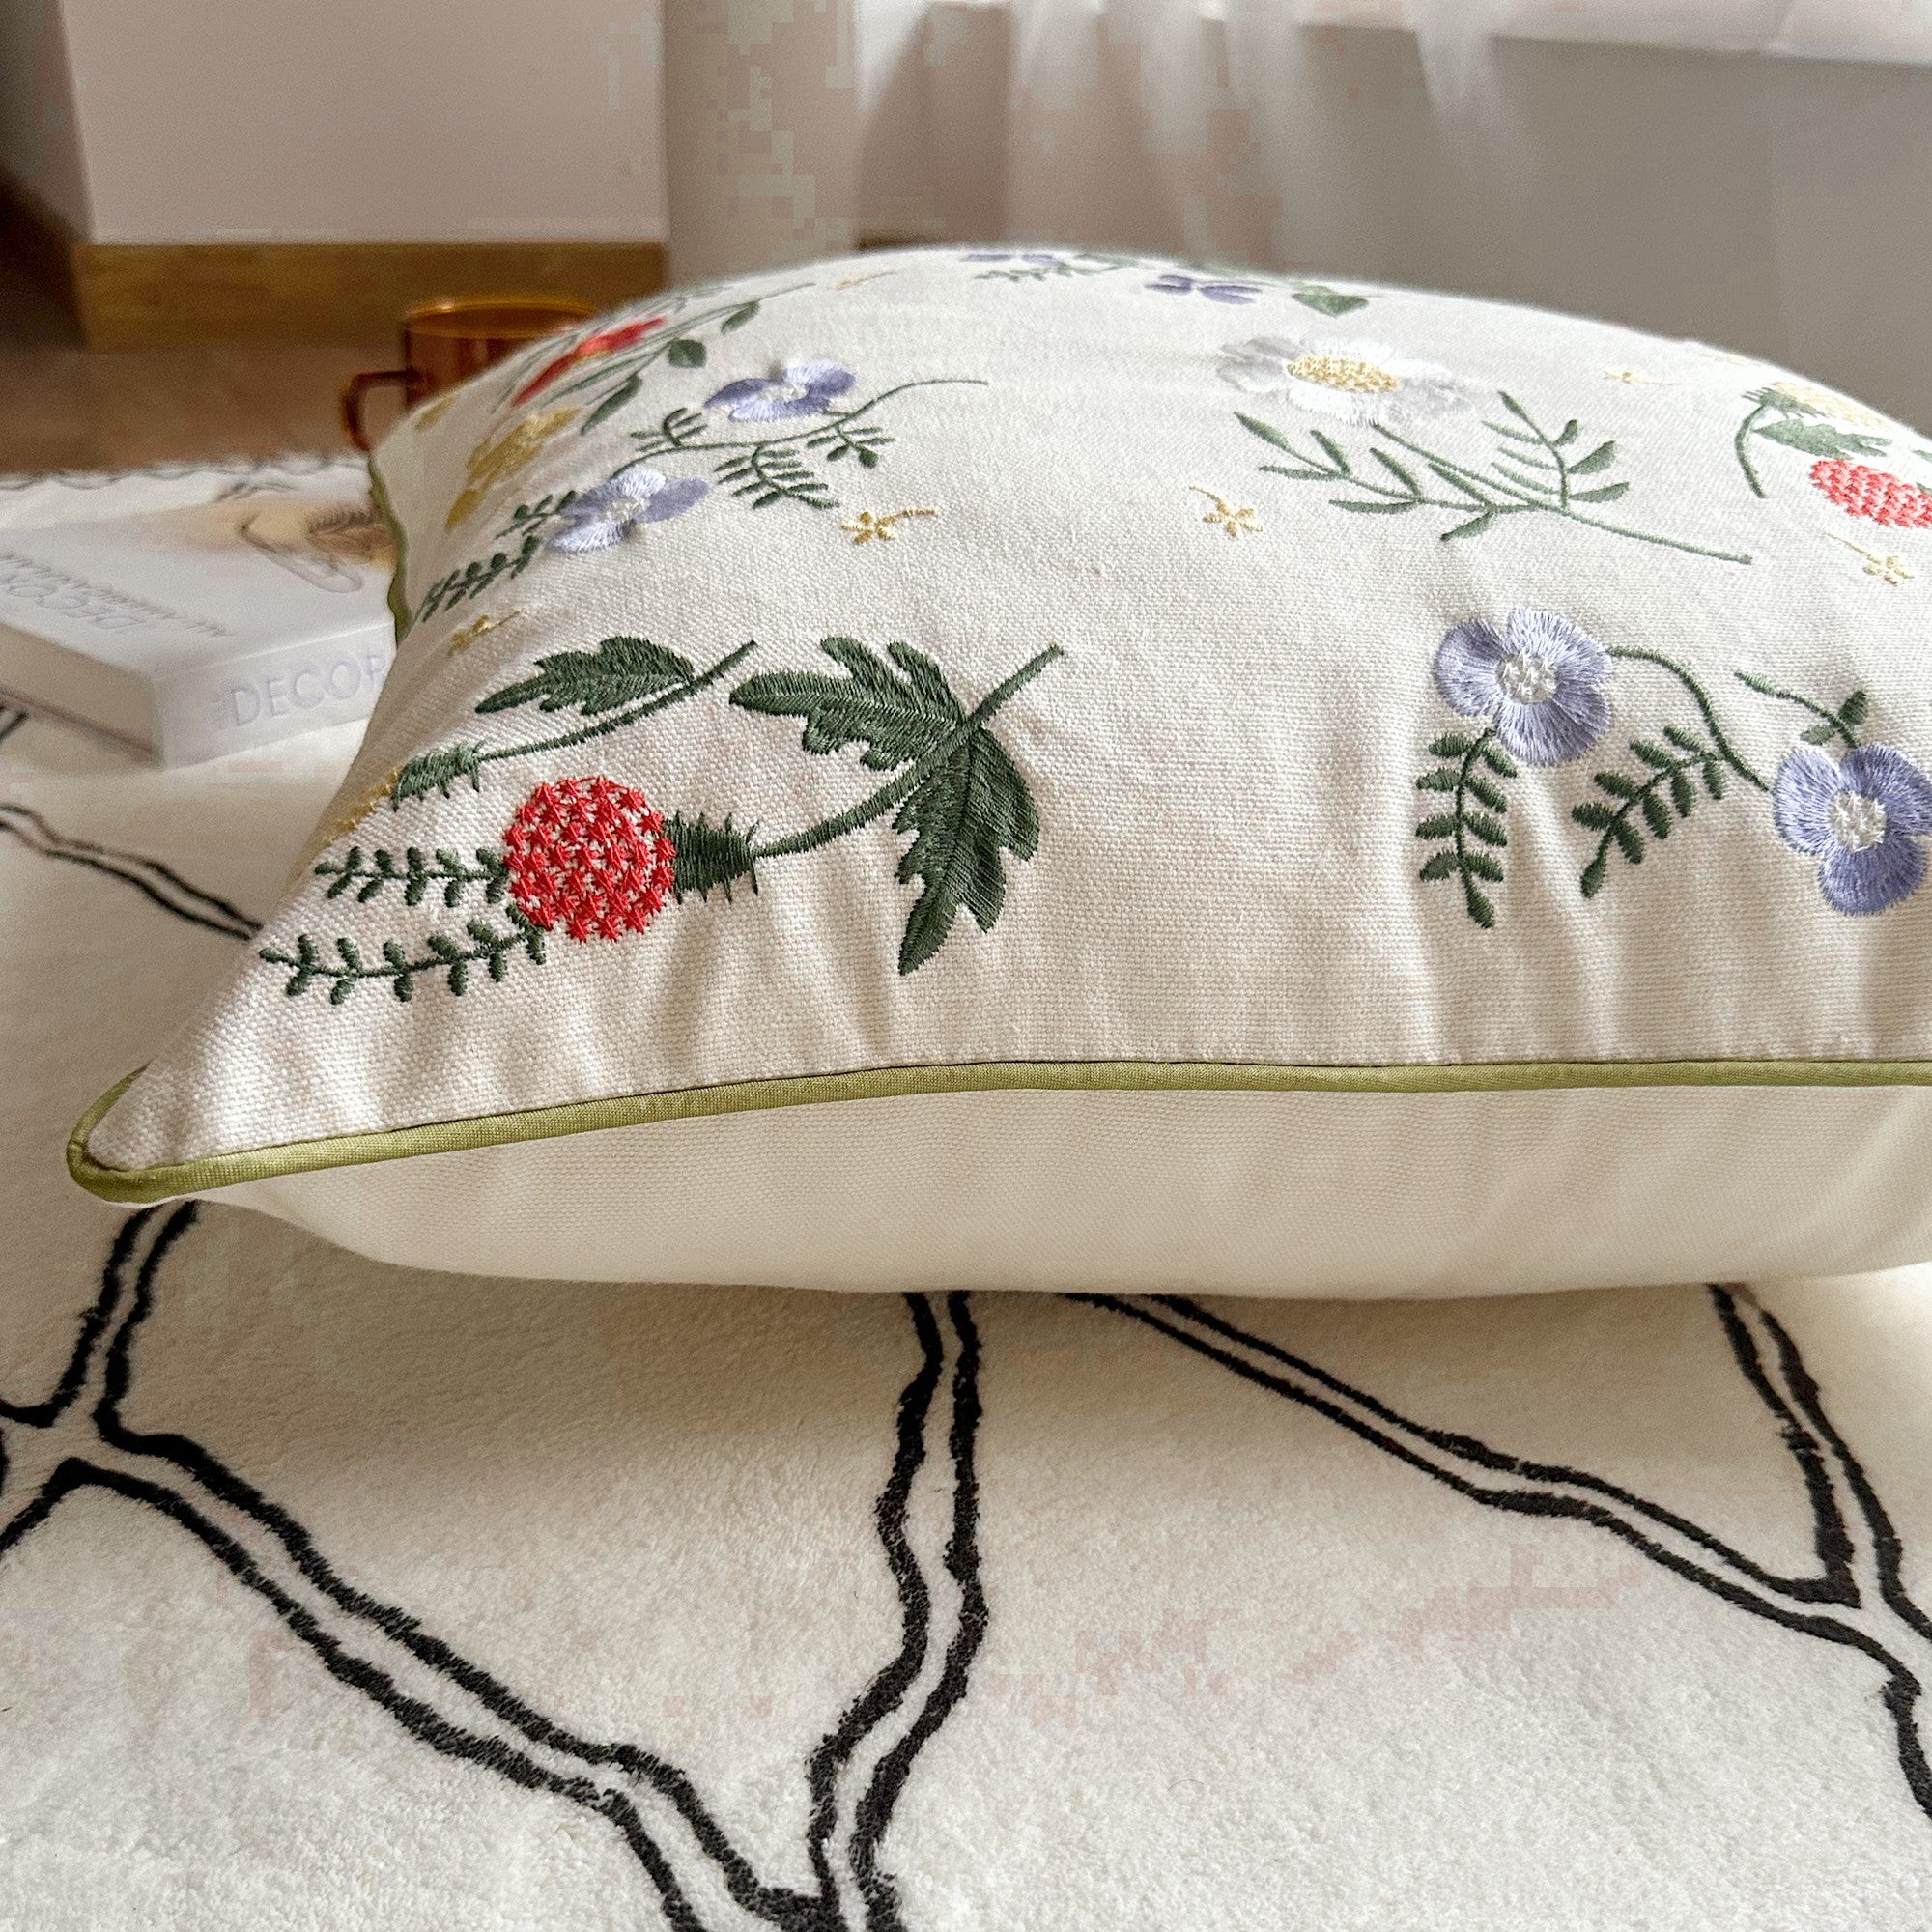 Spring Flower Embroidered Throw Pillow Covers